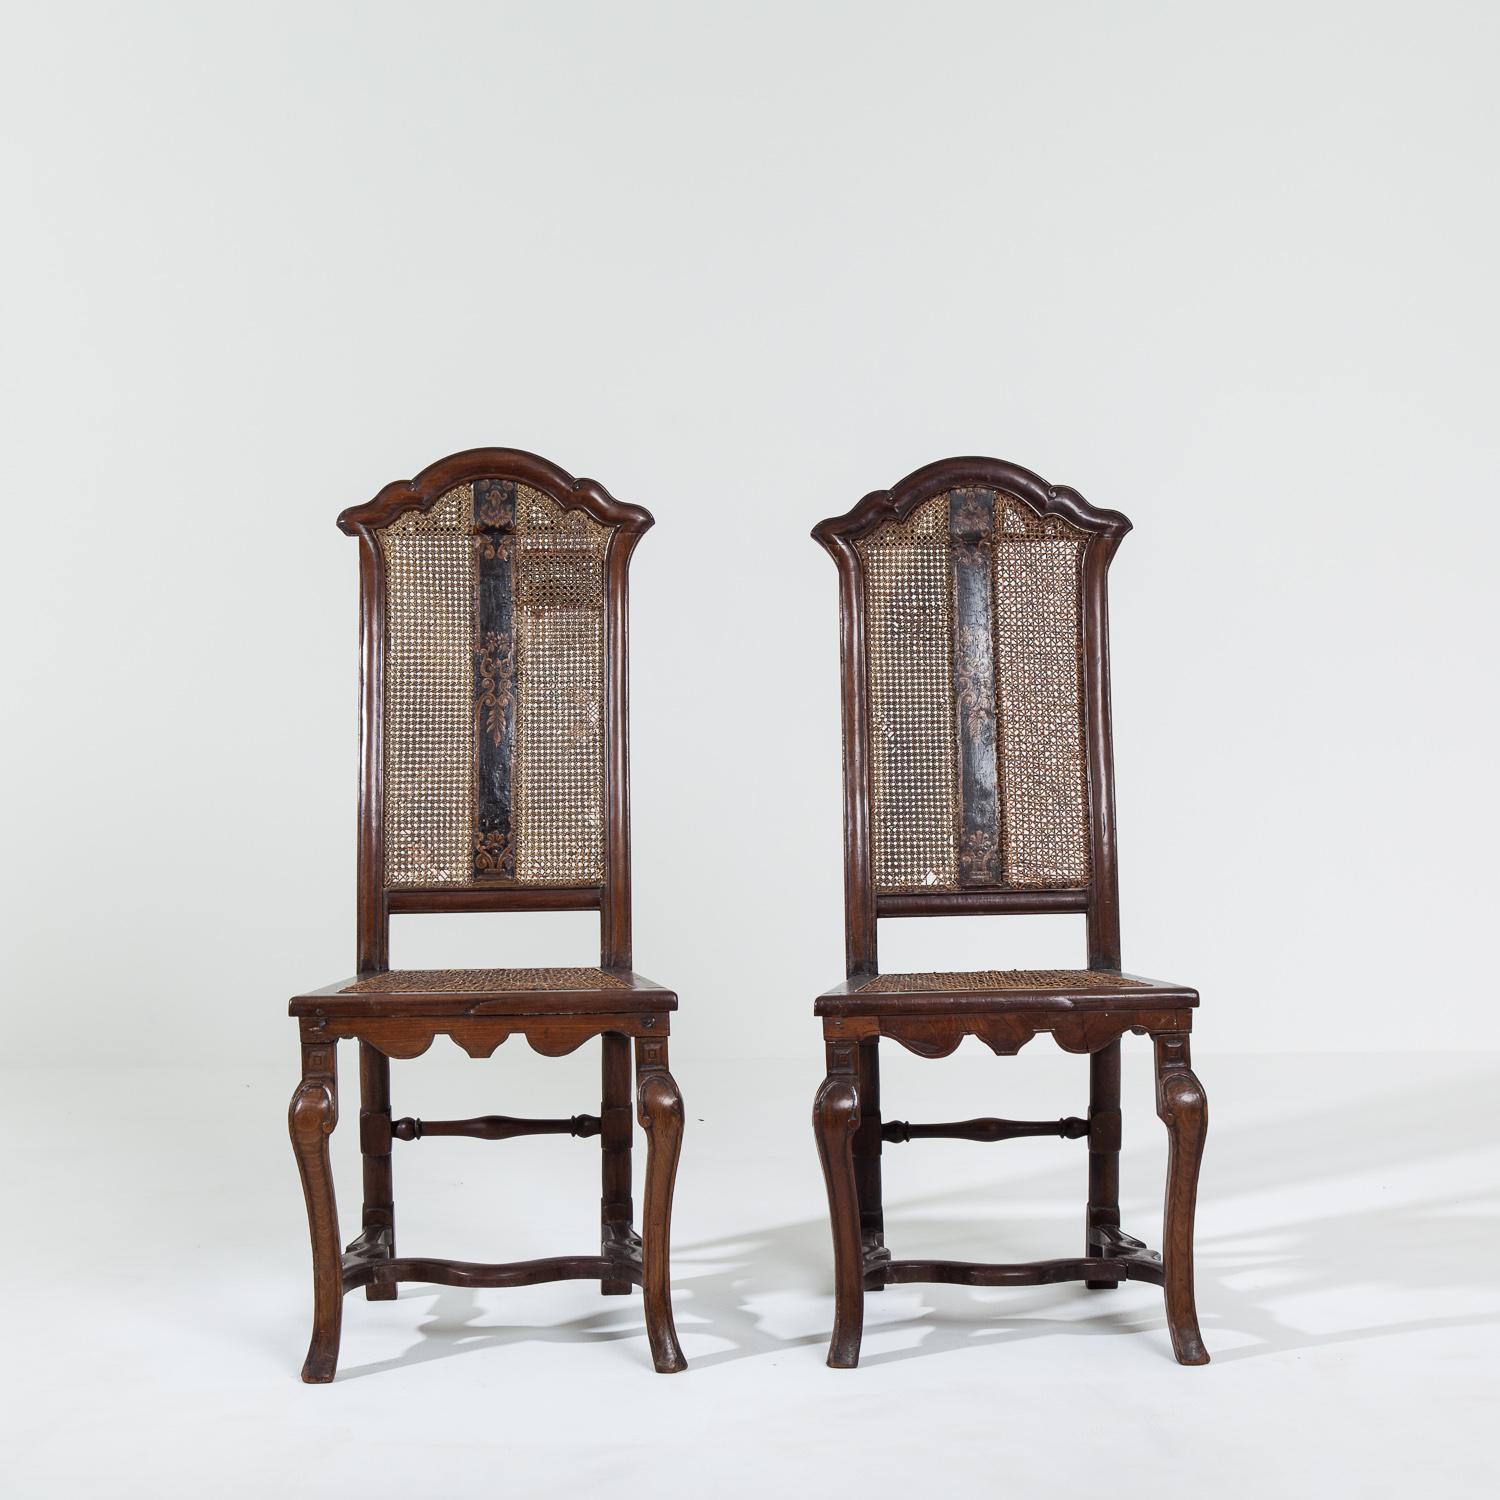 Pair of Italian walnut side chairs featuring a decorative painted panel.

The chairs have caned seats and backs, showing signs of repair work and some minor breakages. Historic repair patch to the back of one of the chairs.

Measure: Height 107cm x